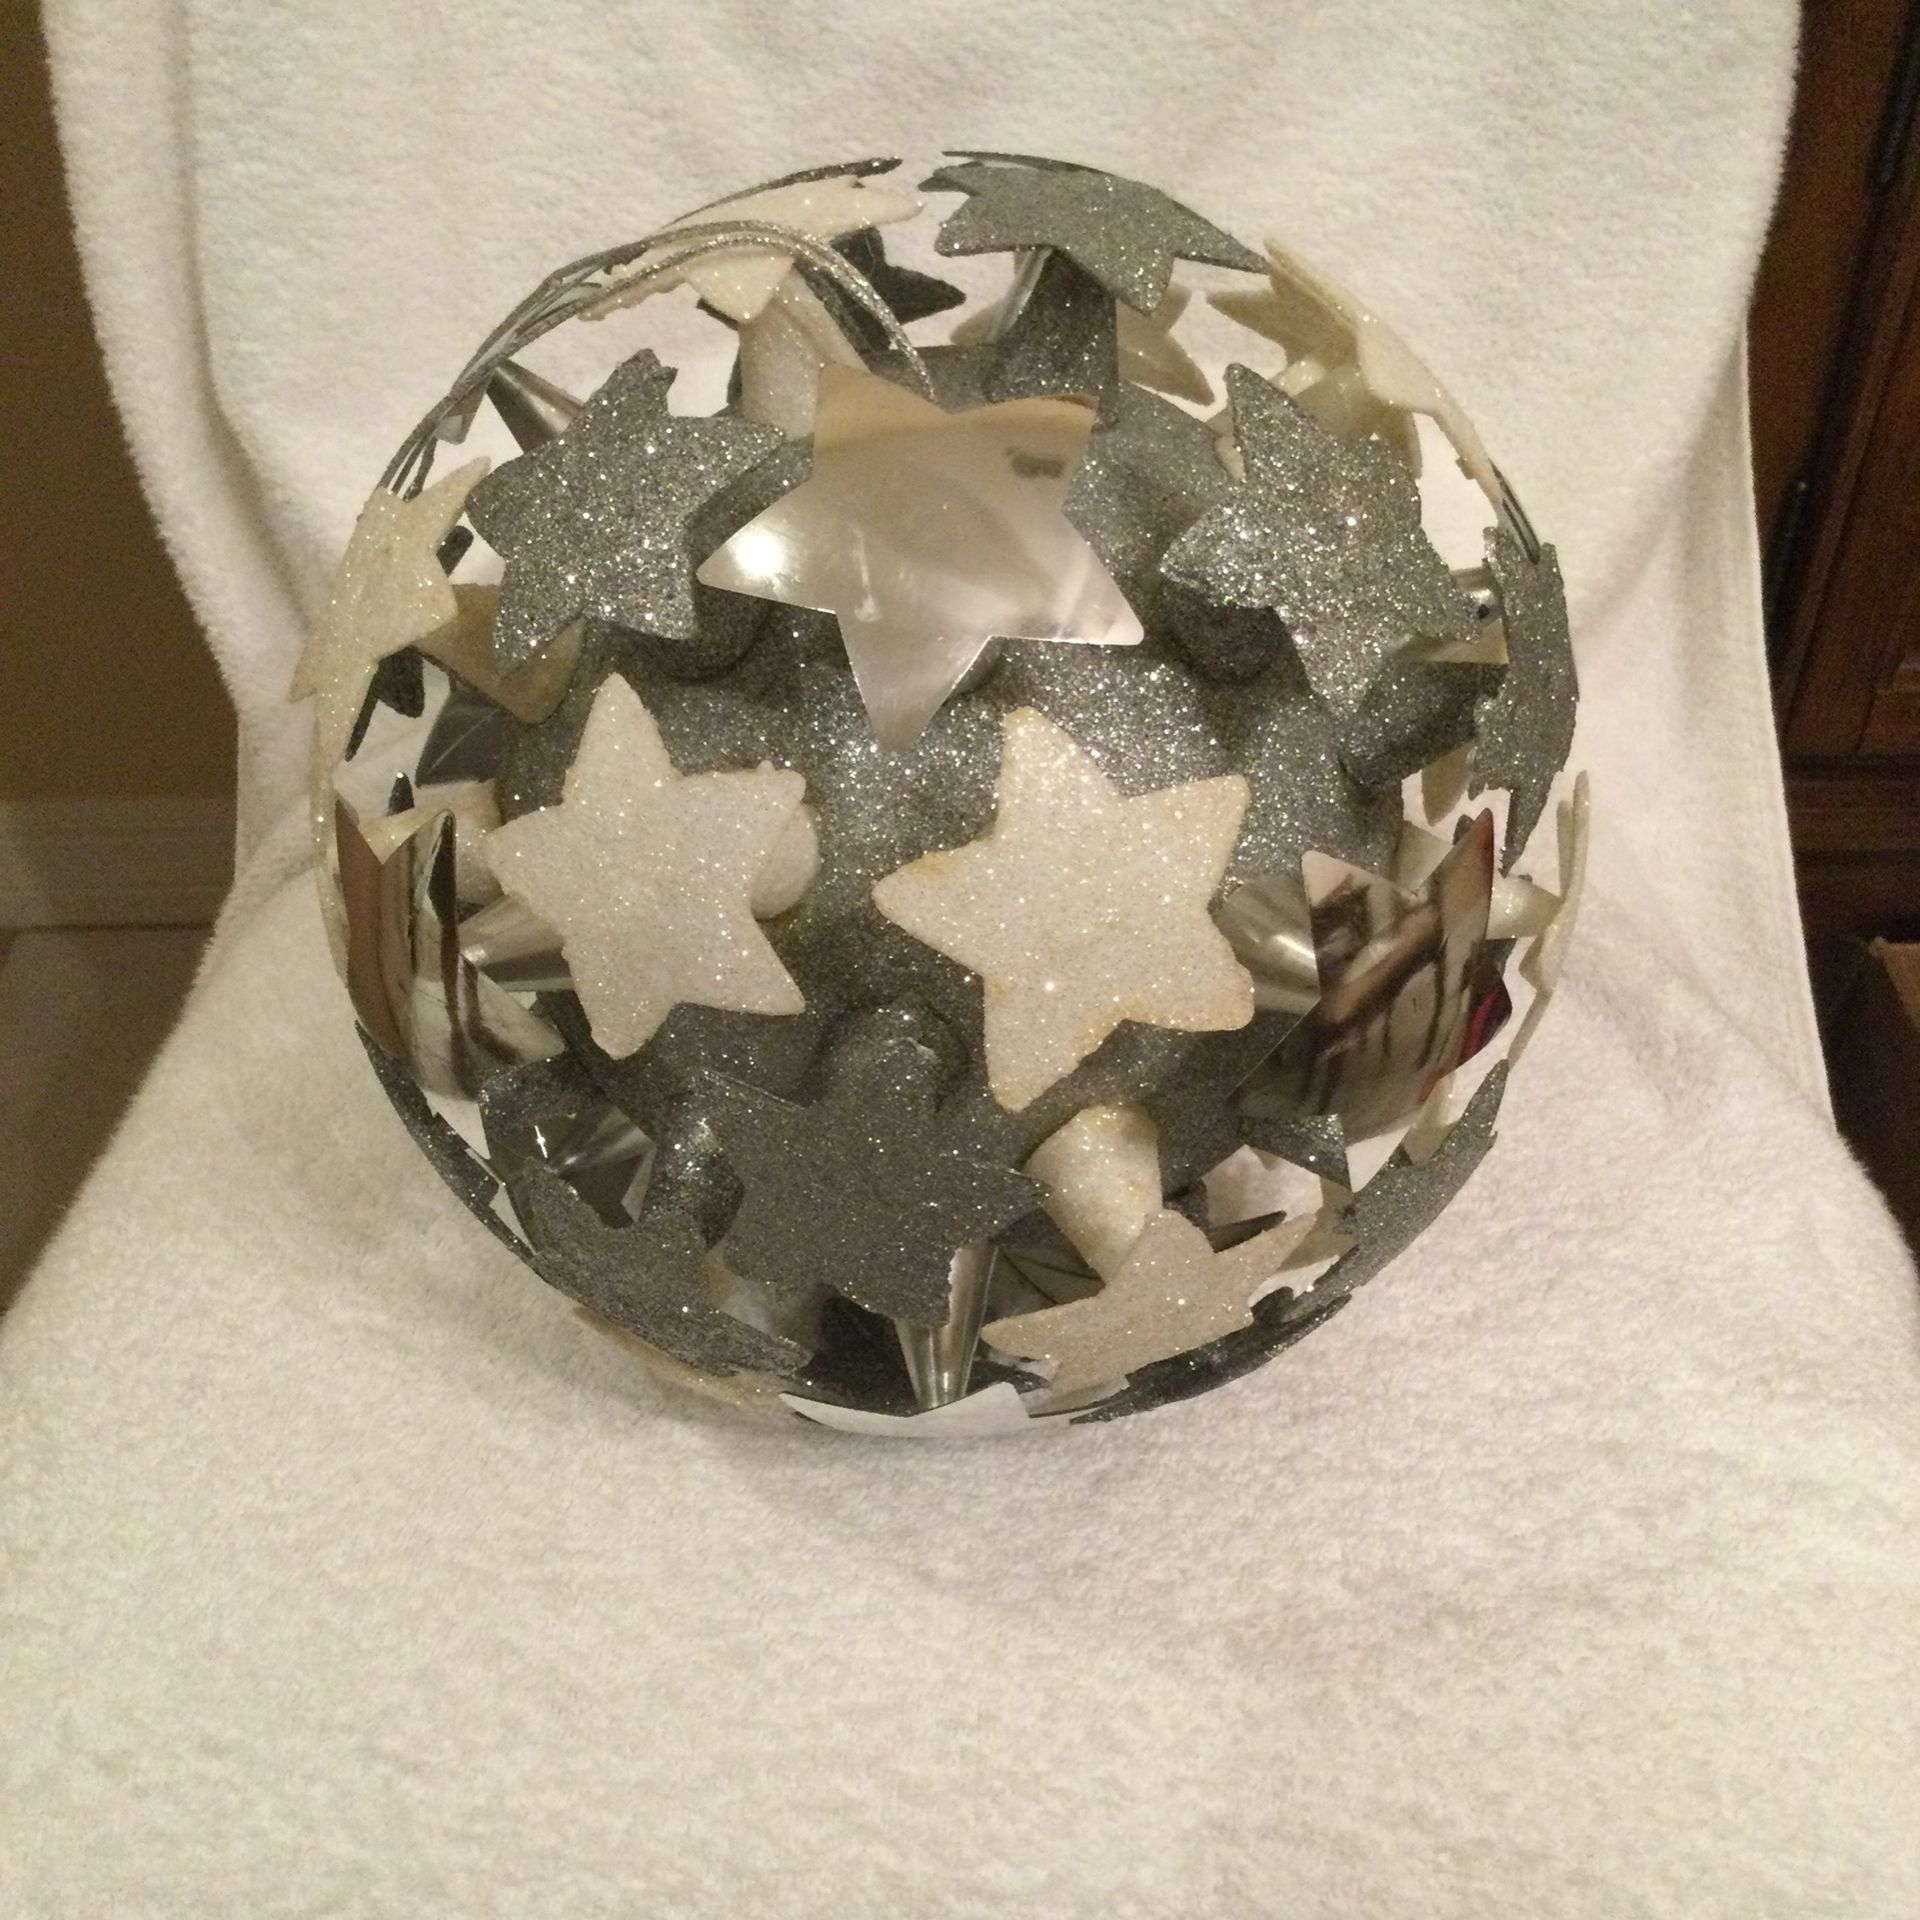 Disney Silver And White Stars On A Polystyrene Ball With Glitter